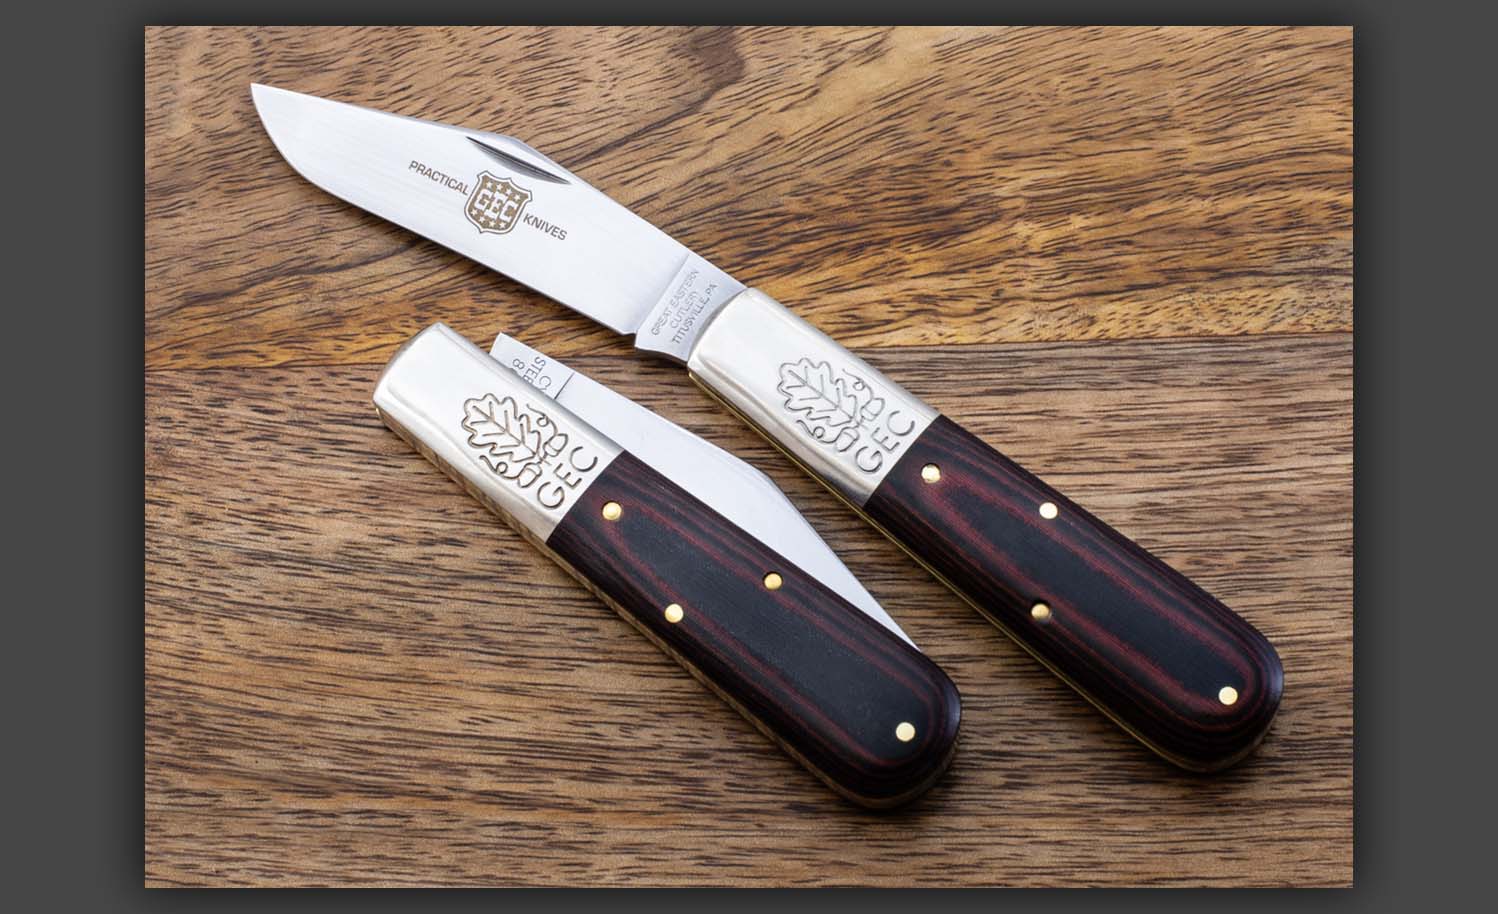 Great Eastern Cutlery Celebrates with the 2 Barlow